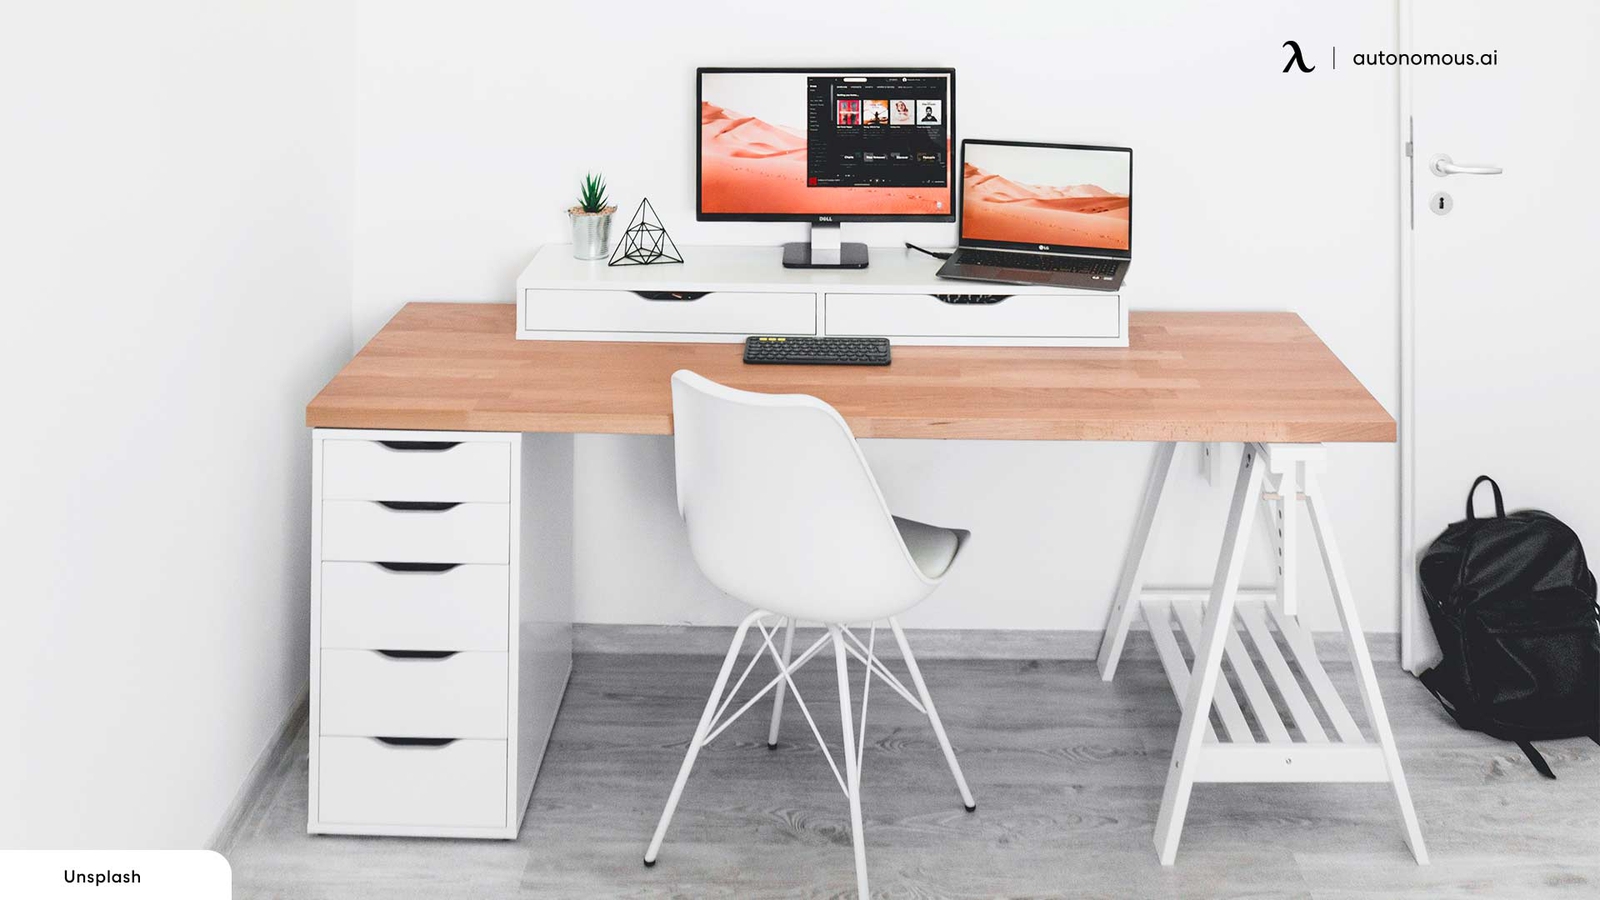 5 Ways to Utilize Your Corner Home Office Space